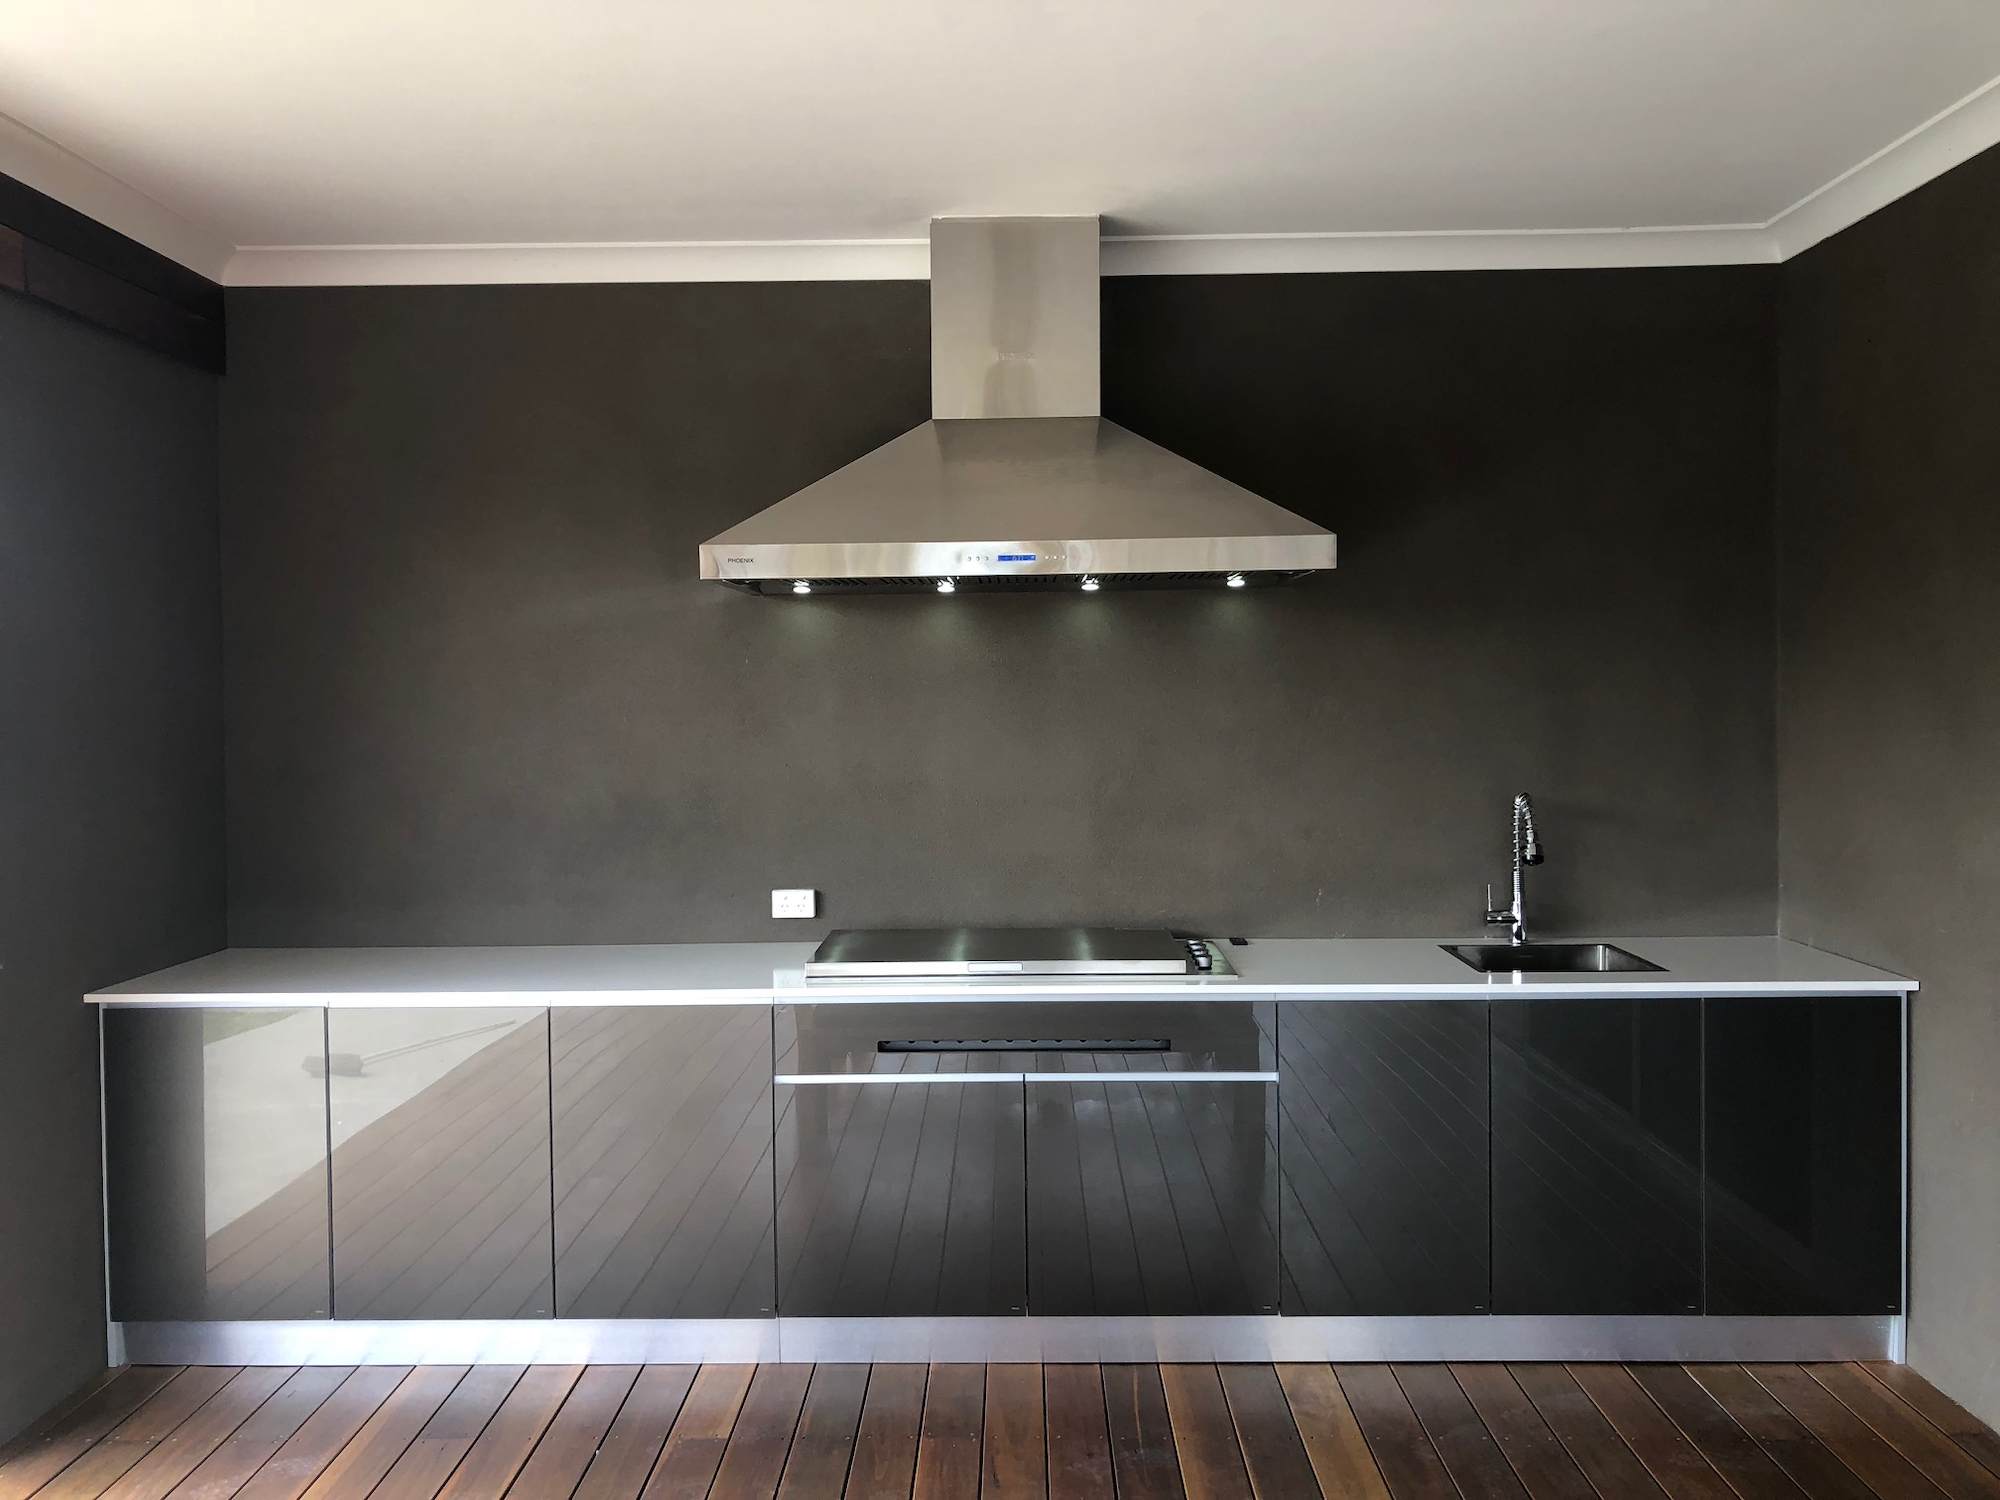 Aluminium cabinets 5mm titanium graphite doors Customer supplied own appliances and bench tops. Melbourne, VIC